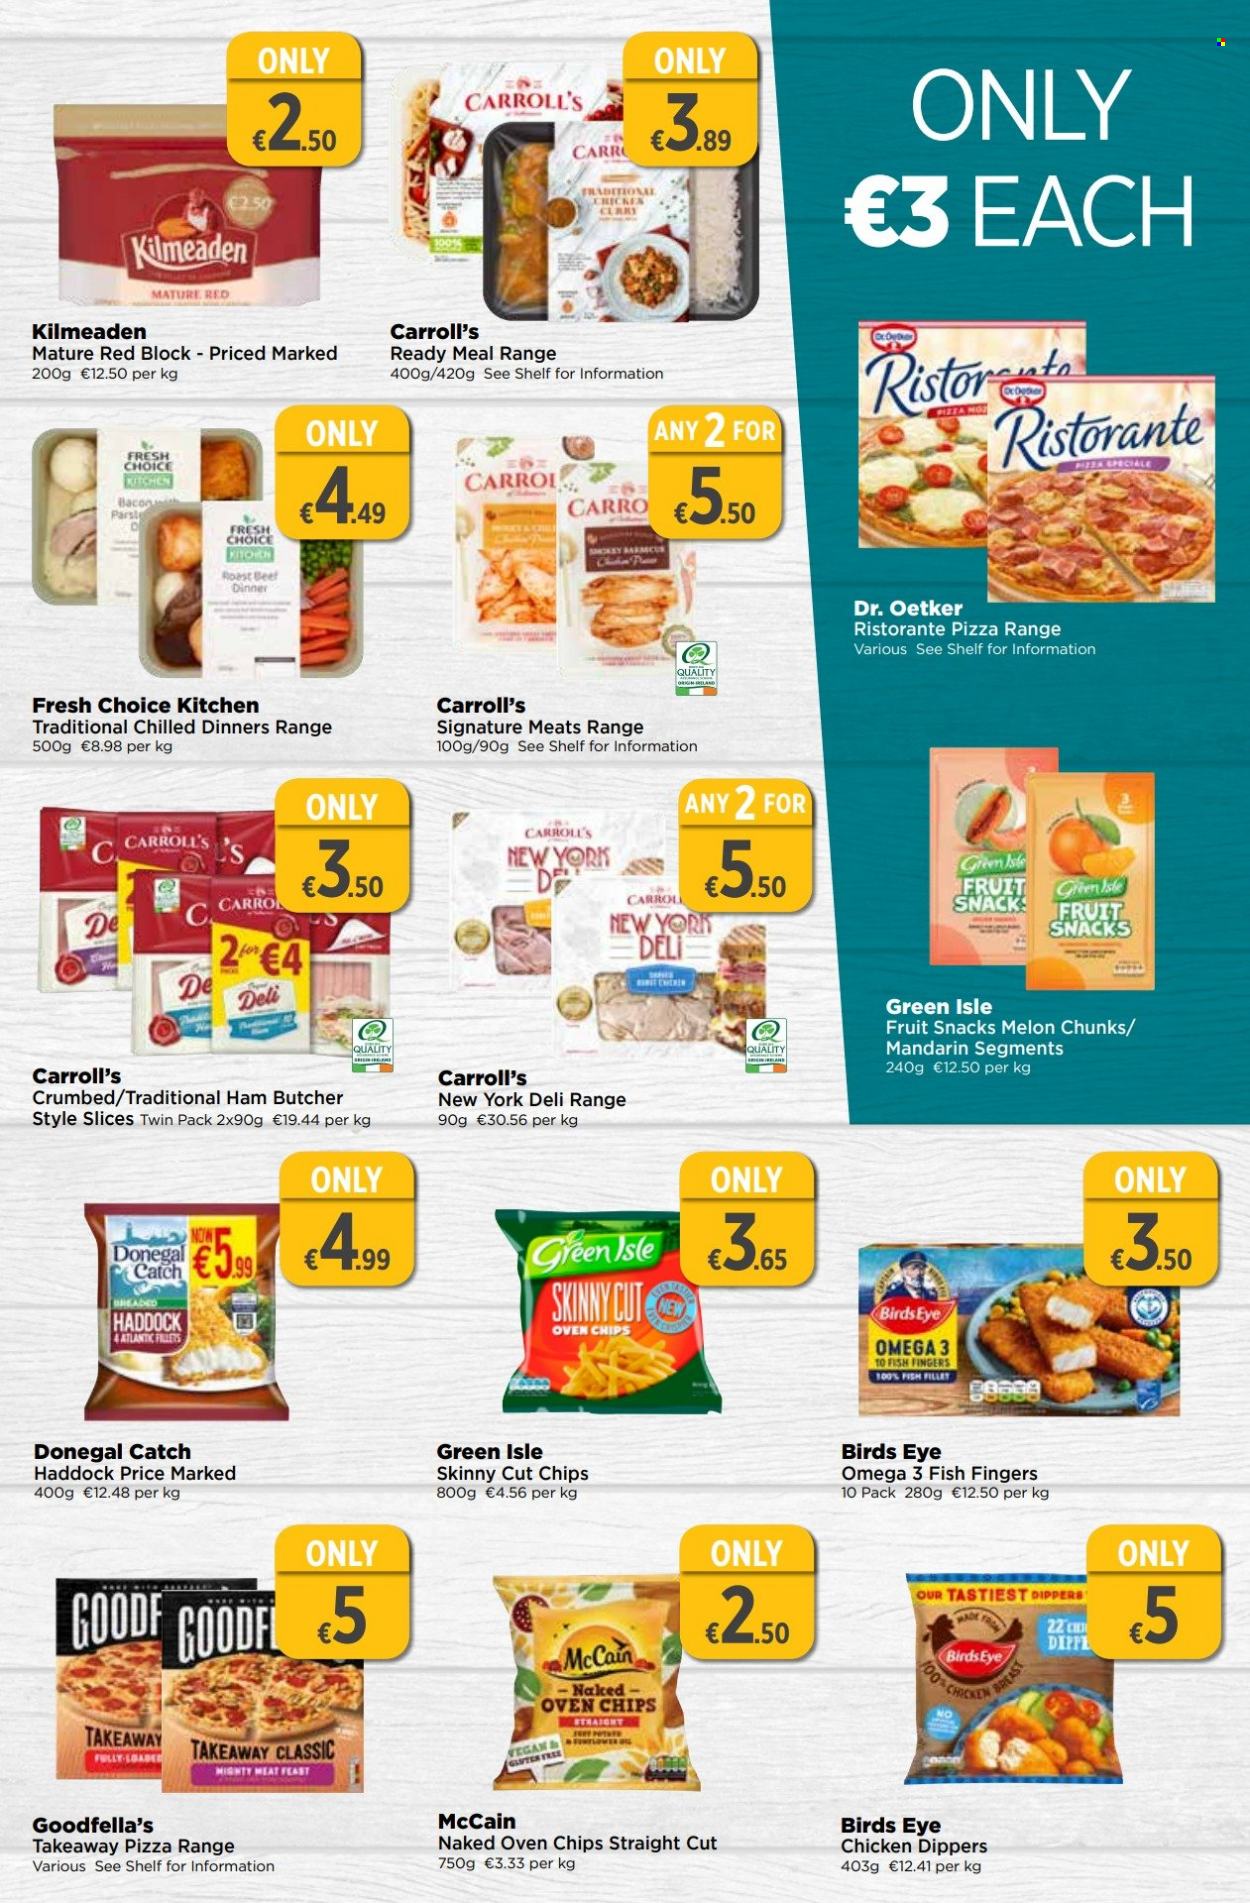 thumbnail - EUROSPAR offer  - 25.05.2023 - 14.06.2023 - Sales products - mandarines, melons, fish fillets, haddock, fish, fish fingers, fish sticks, pizza, Bird's Eye, Fresh Choice Kitchen, roast, ready meal, bacon, Dr. Oetker, chicken dippers, Donegal Catch, McCain, frozen chips, fruit snack, Omega-3. Page 11.